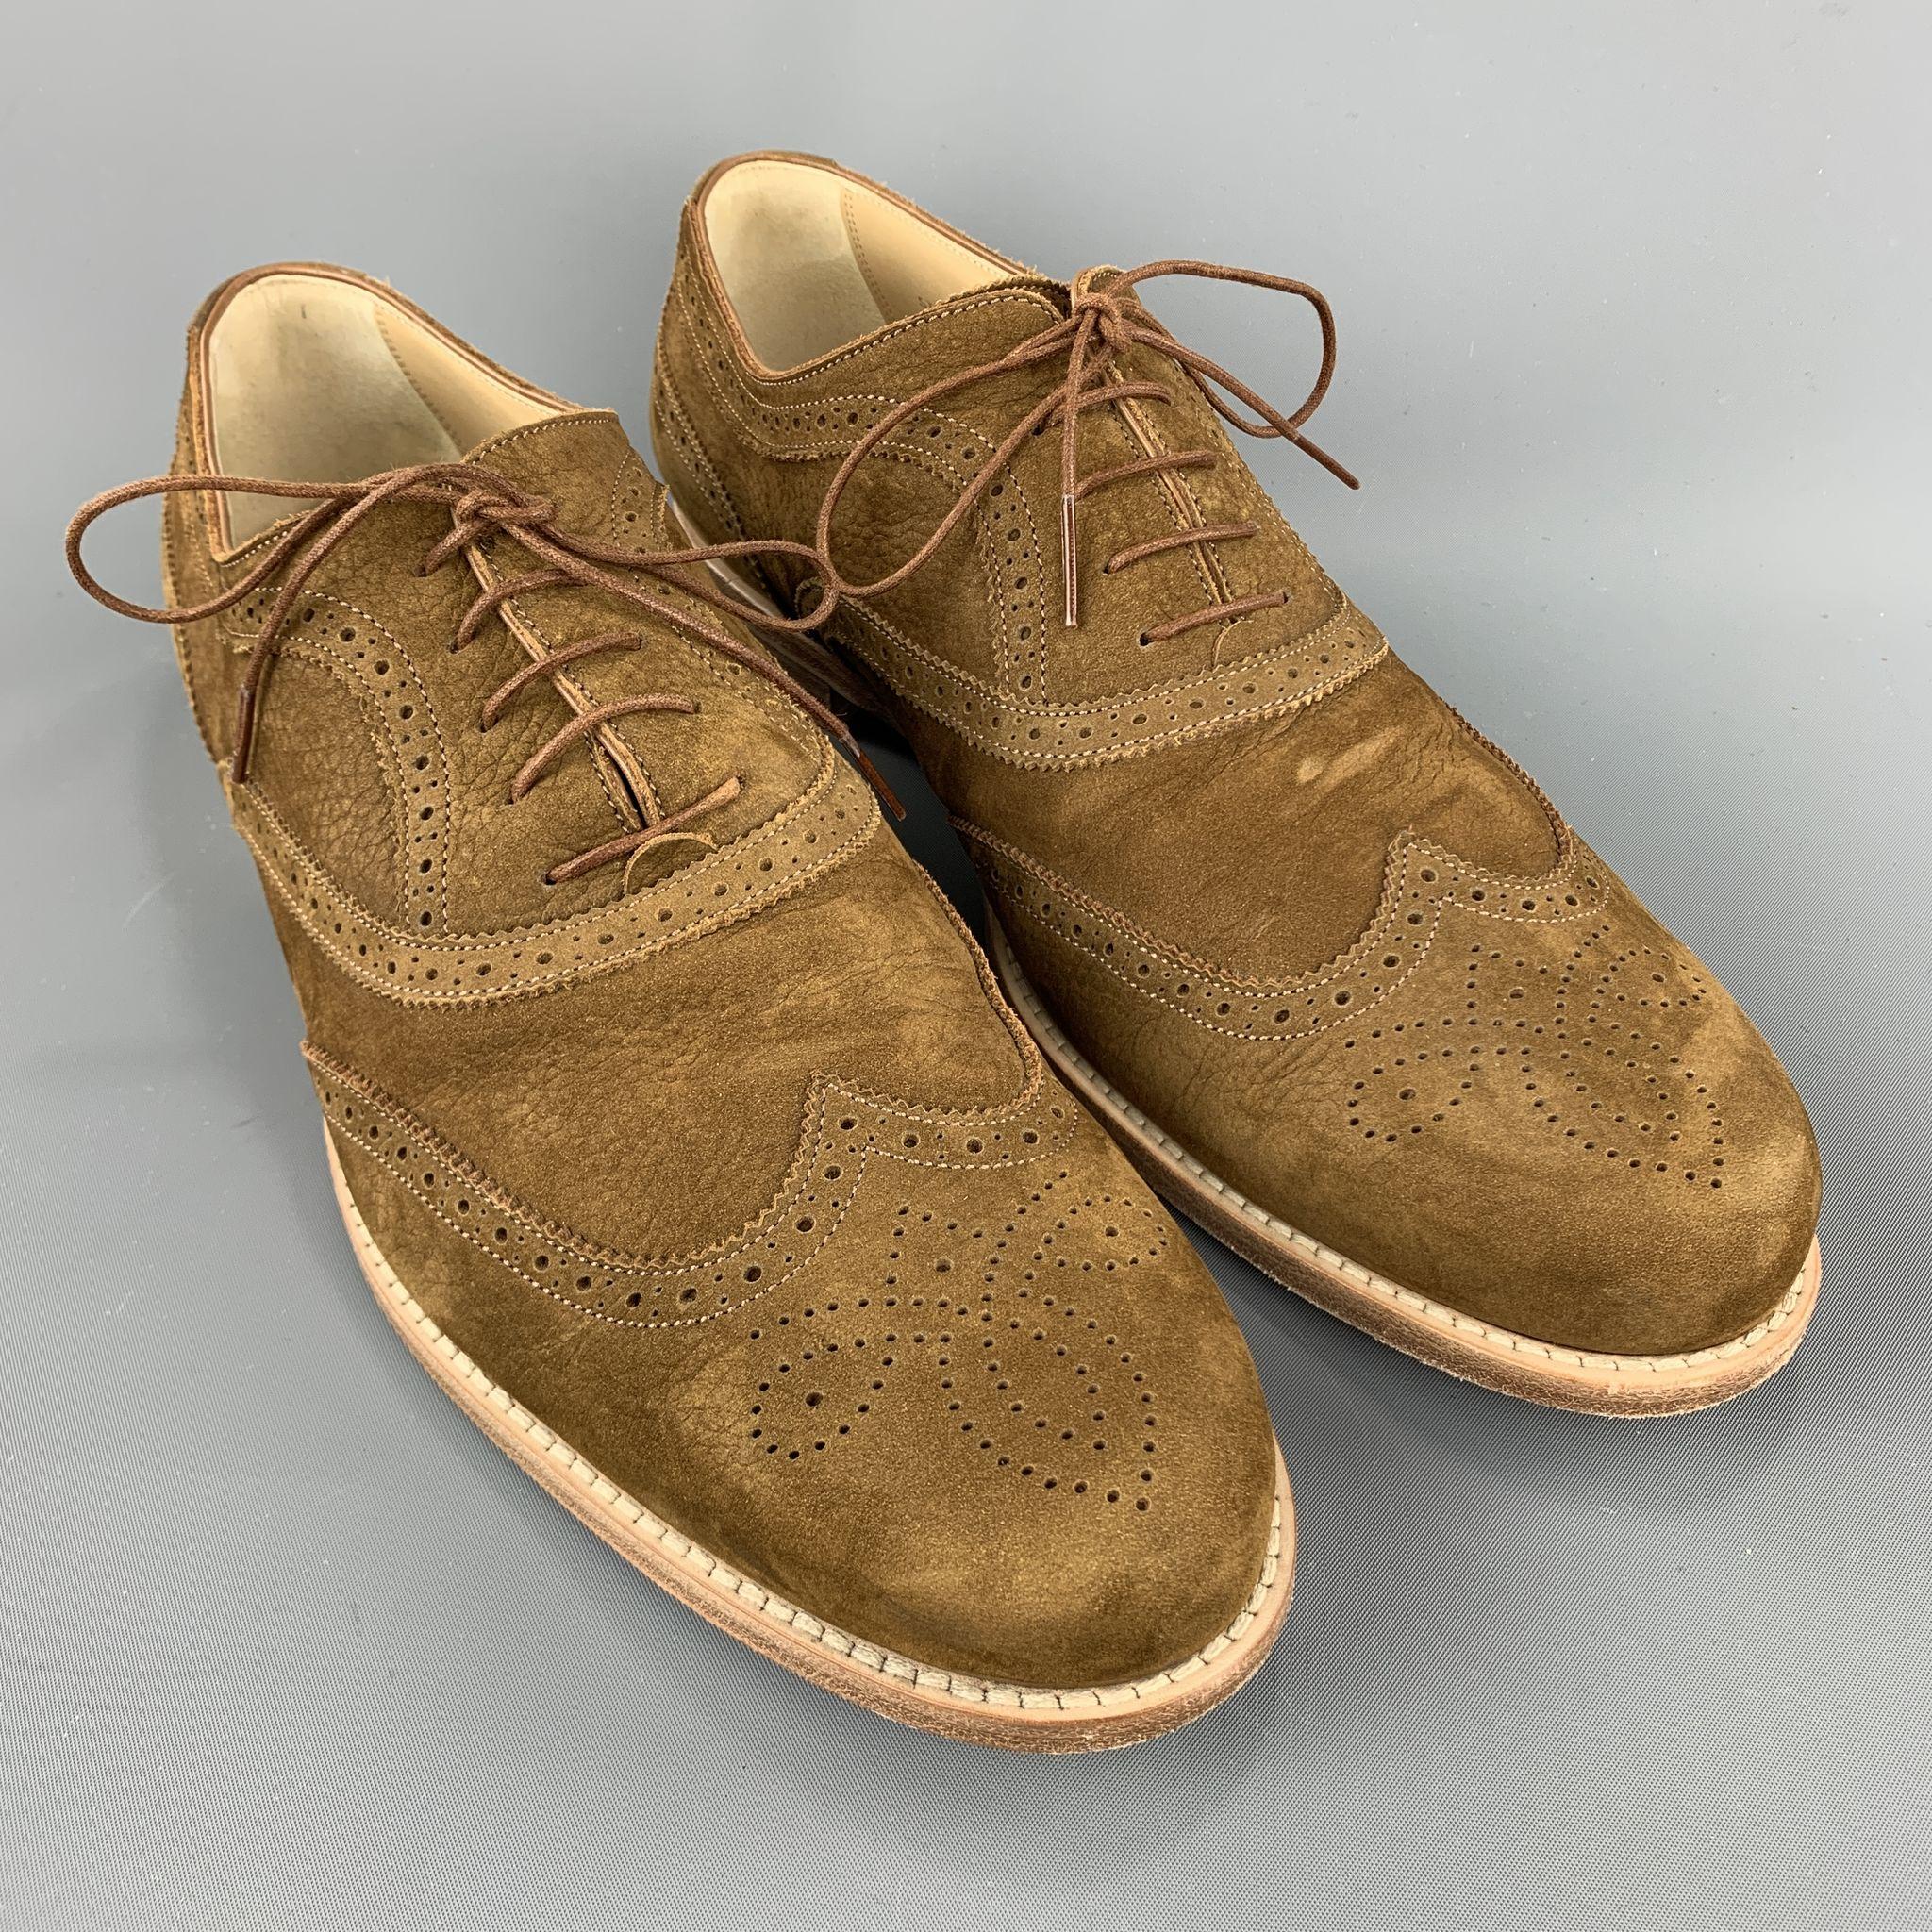 Men's LOUIS VUITTON lace up shoes comes in a brown perforated leather featuring a cap toe and a wooden heel. Made in Italy.

Excellent Pre-Owned Condition.
Marked: 10.5

Outsole: 4.25 in. x 12.5 in. 